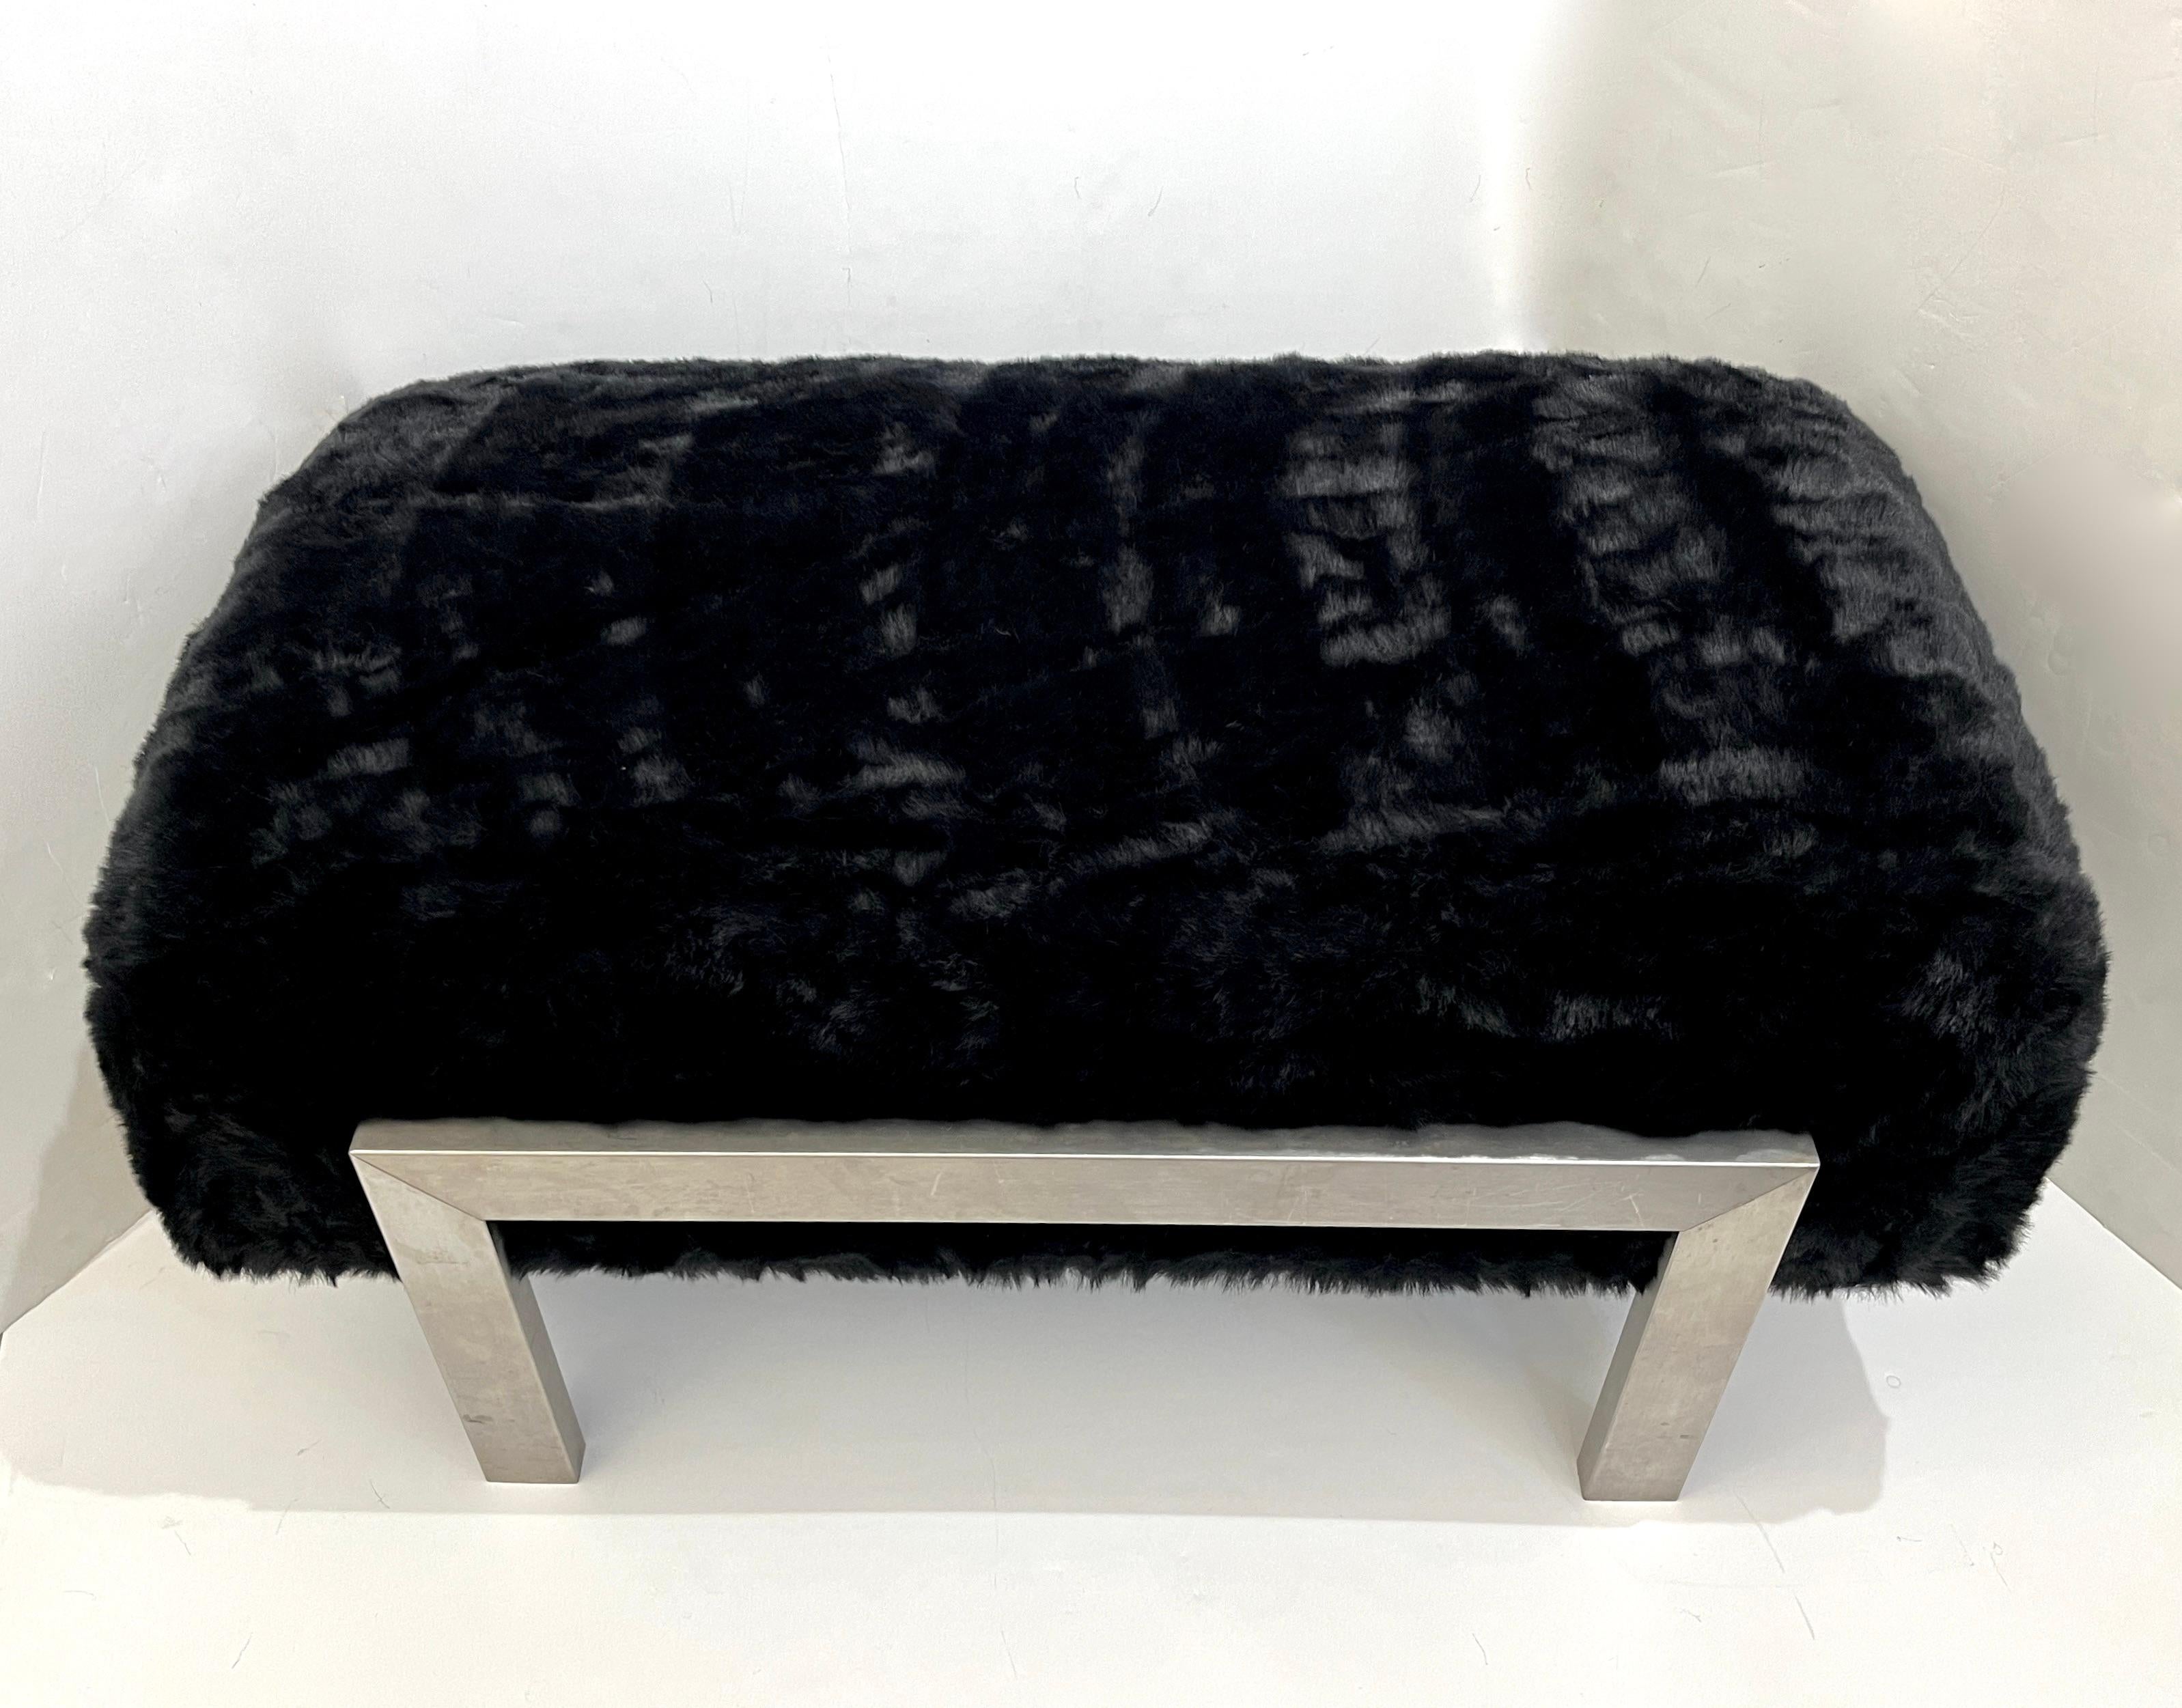 1970s Italian Vintage Black Faux Fur Steel Bed Stool Bench - 1 Pair available For Sale 4